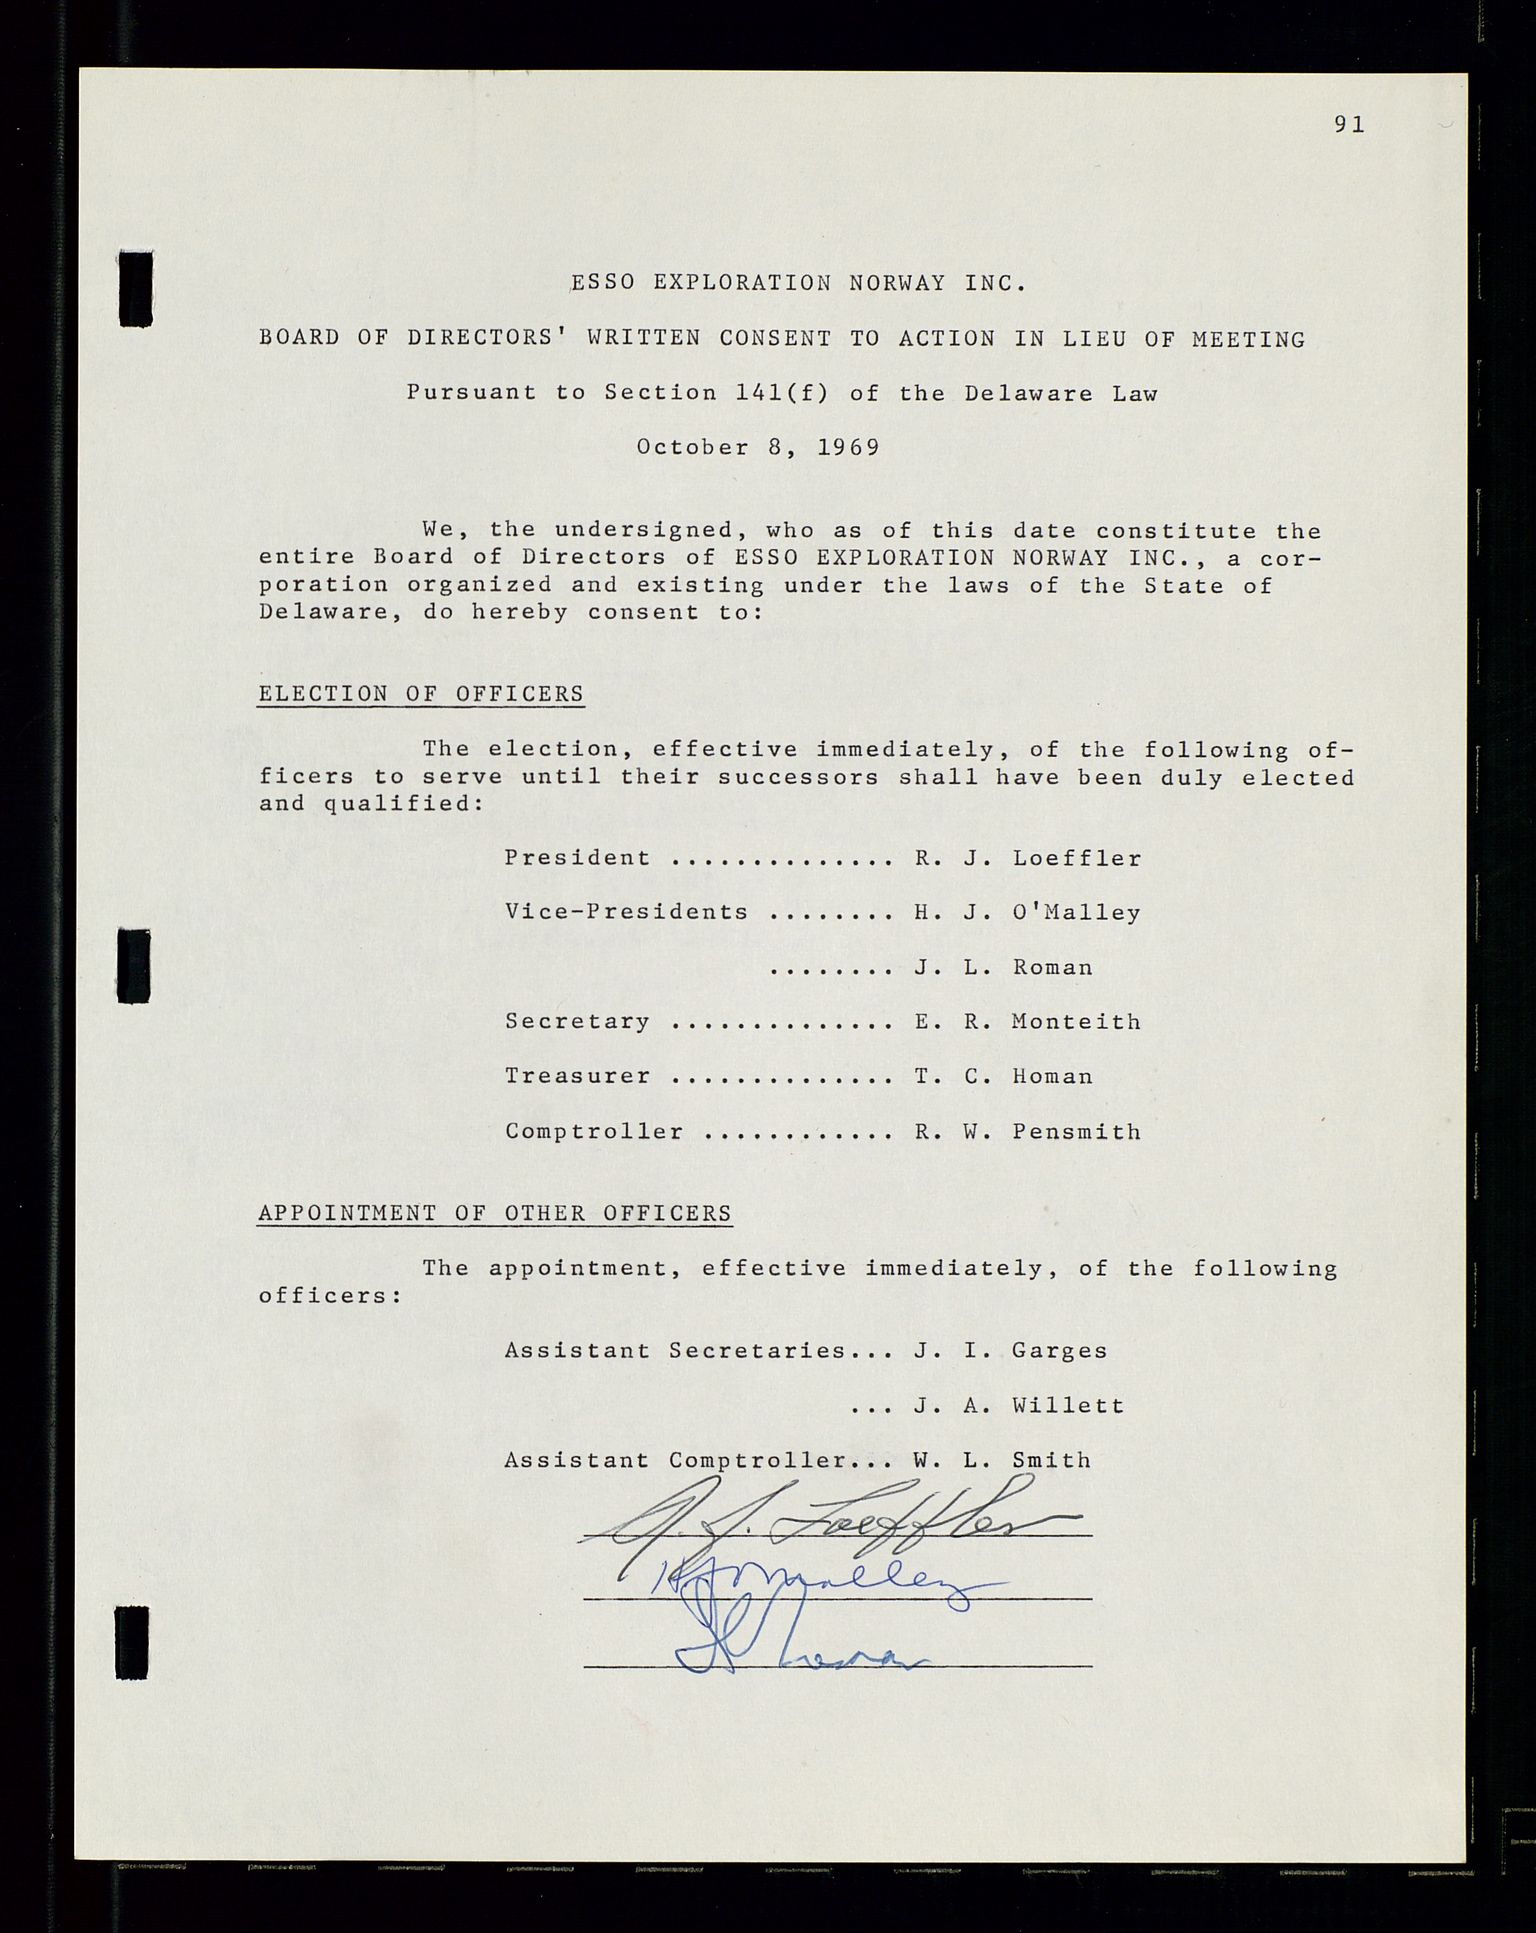 Pa 1512 - Esso Exploration and Production Norway Inc., SAST/A-101917/A/Aa/L0001/0001: Styredokumenter / Corporate records, By-Laws, Board meeting minutes, Incorporations, 1965-1975, p. 91